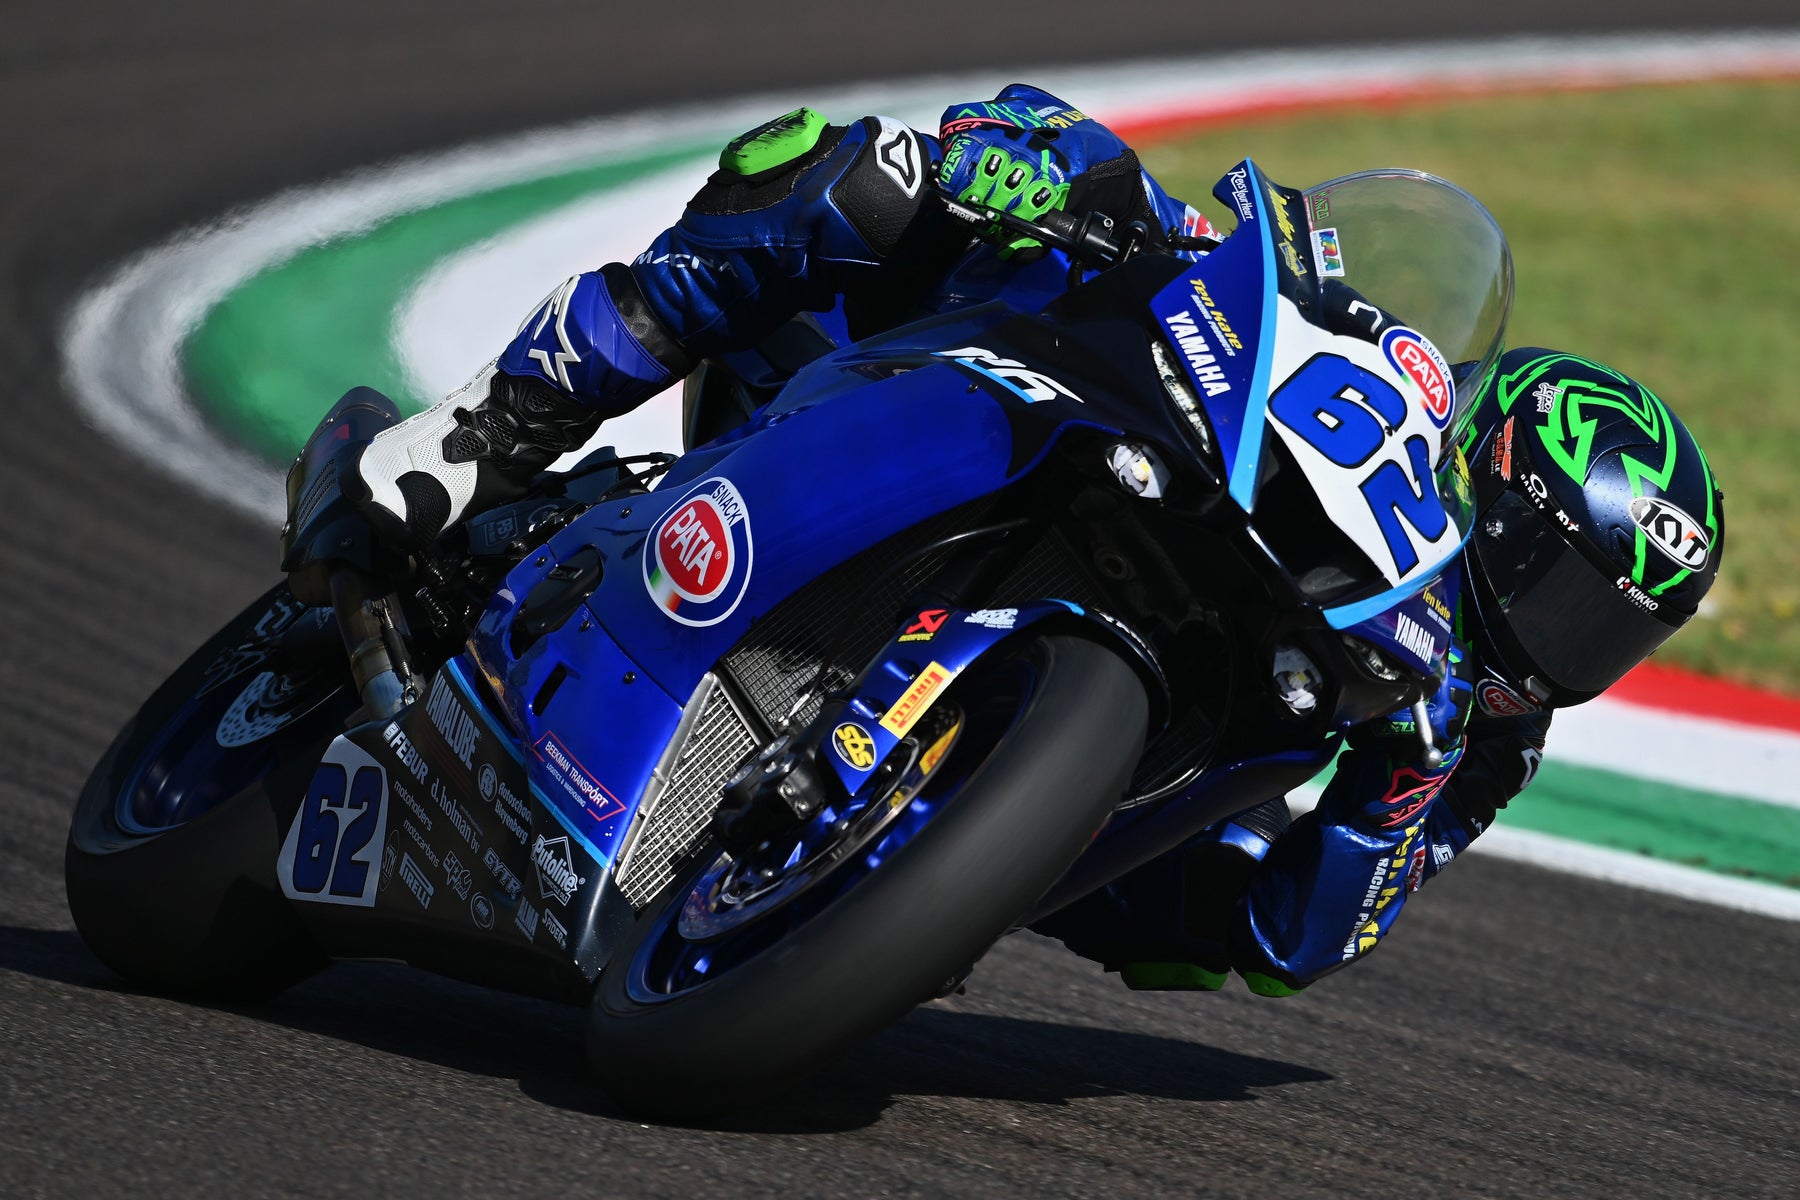 UNTOUCHABLE STEFANO MANZI POWERS TO WORLD SUPERSPORT DOUBLE VICTORY AT IMOLA